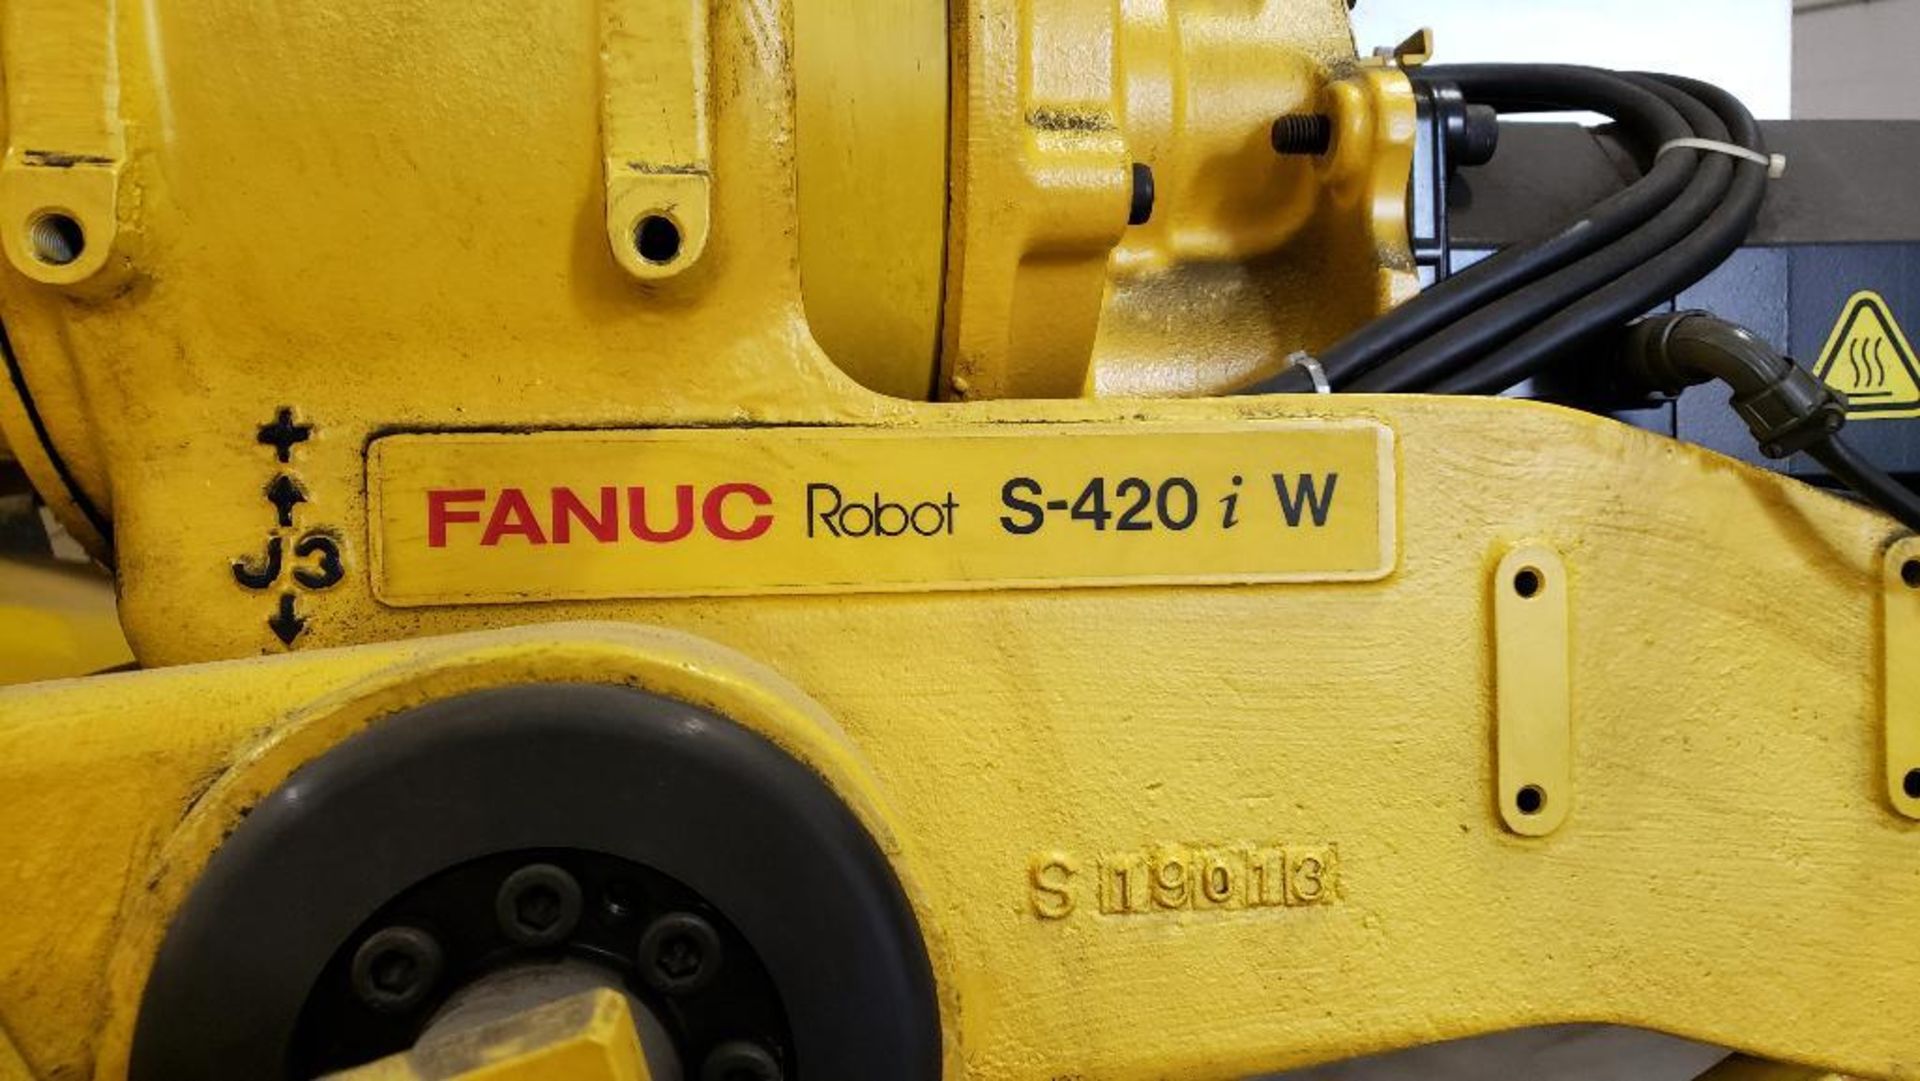 Fanuc S-420iW robot 6-axis arm. - Image 2 of 8